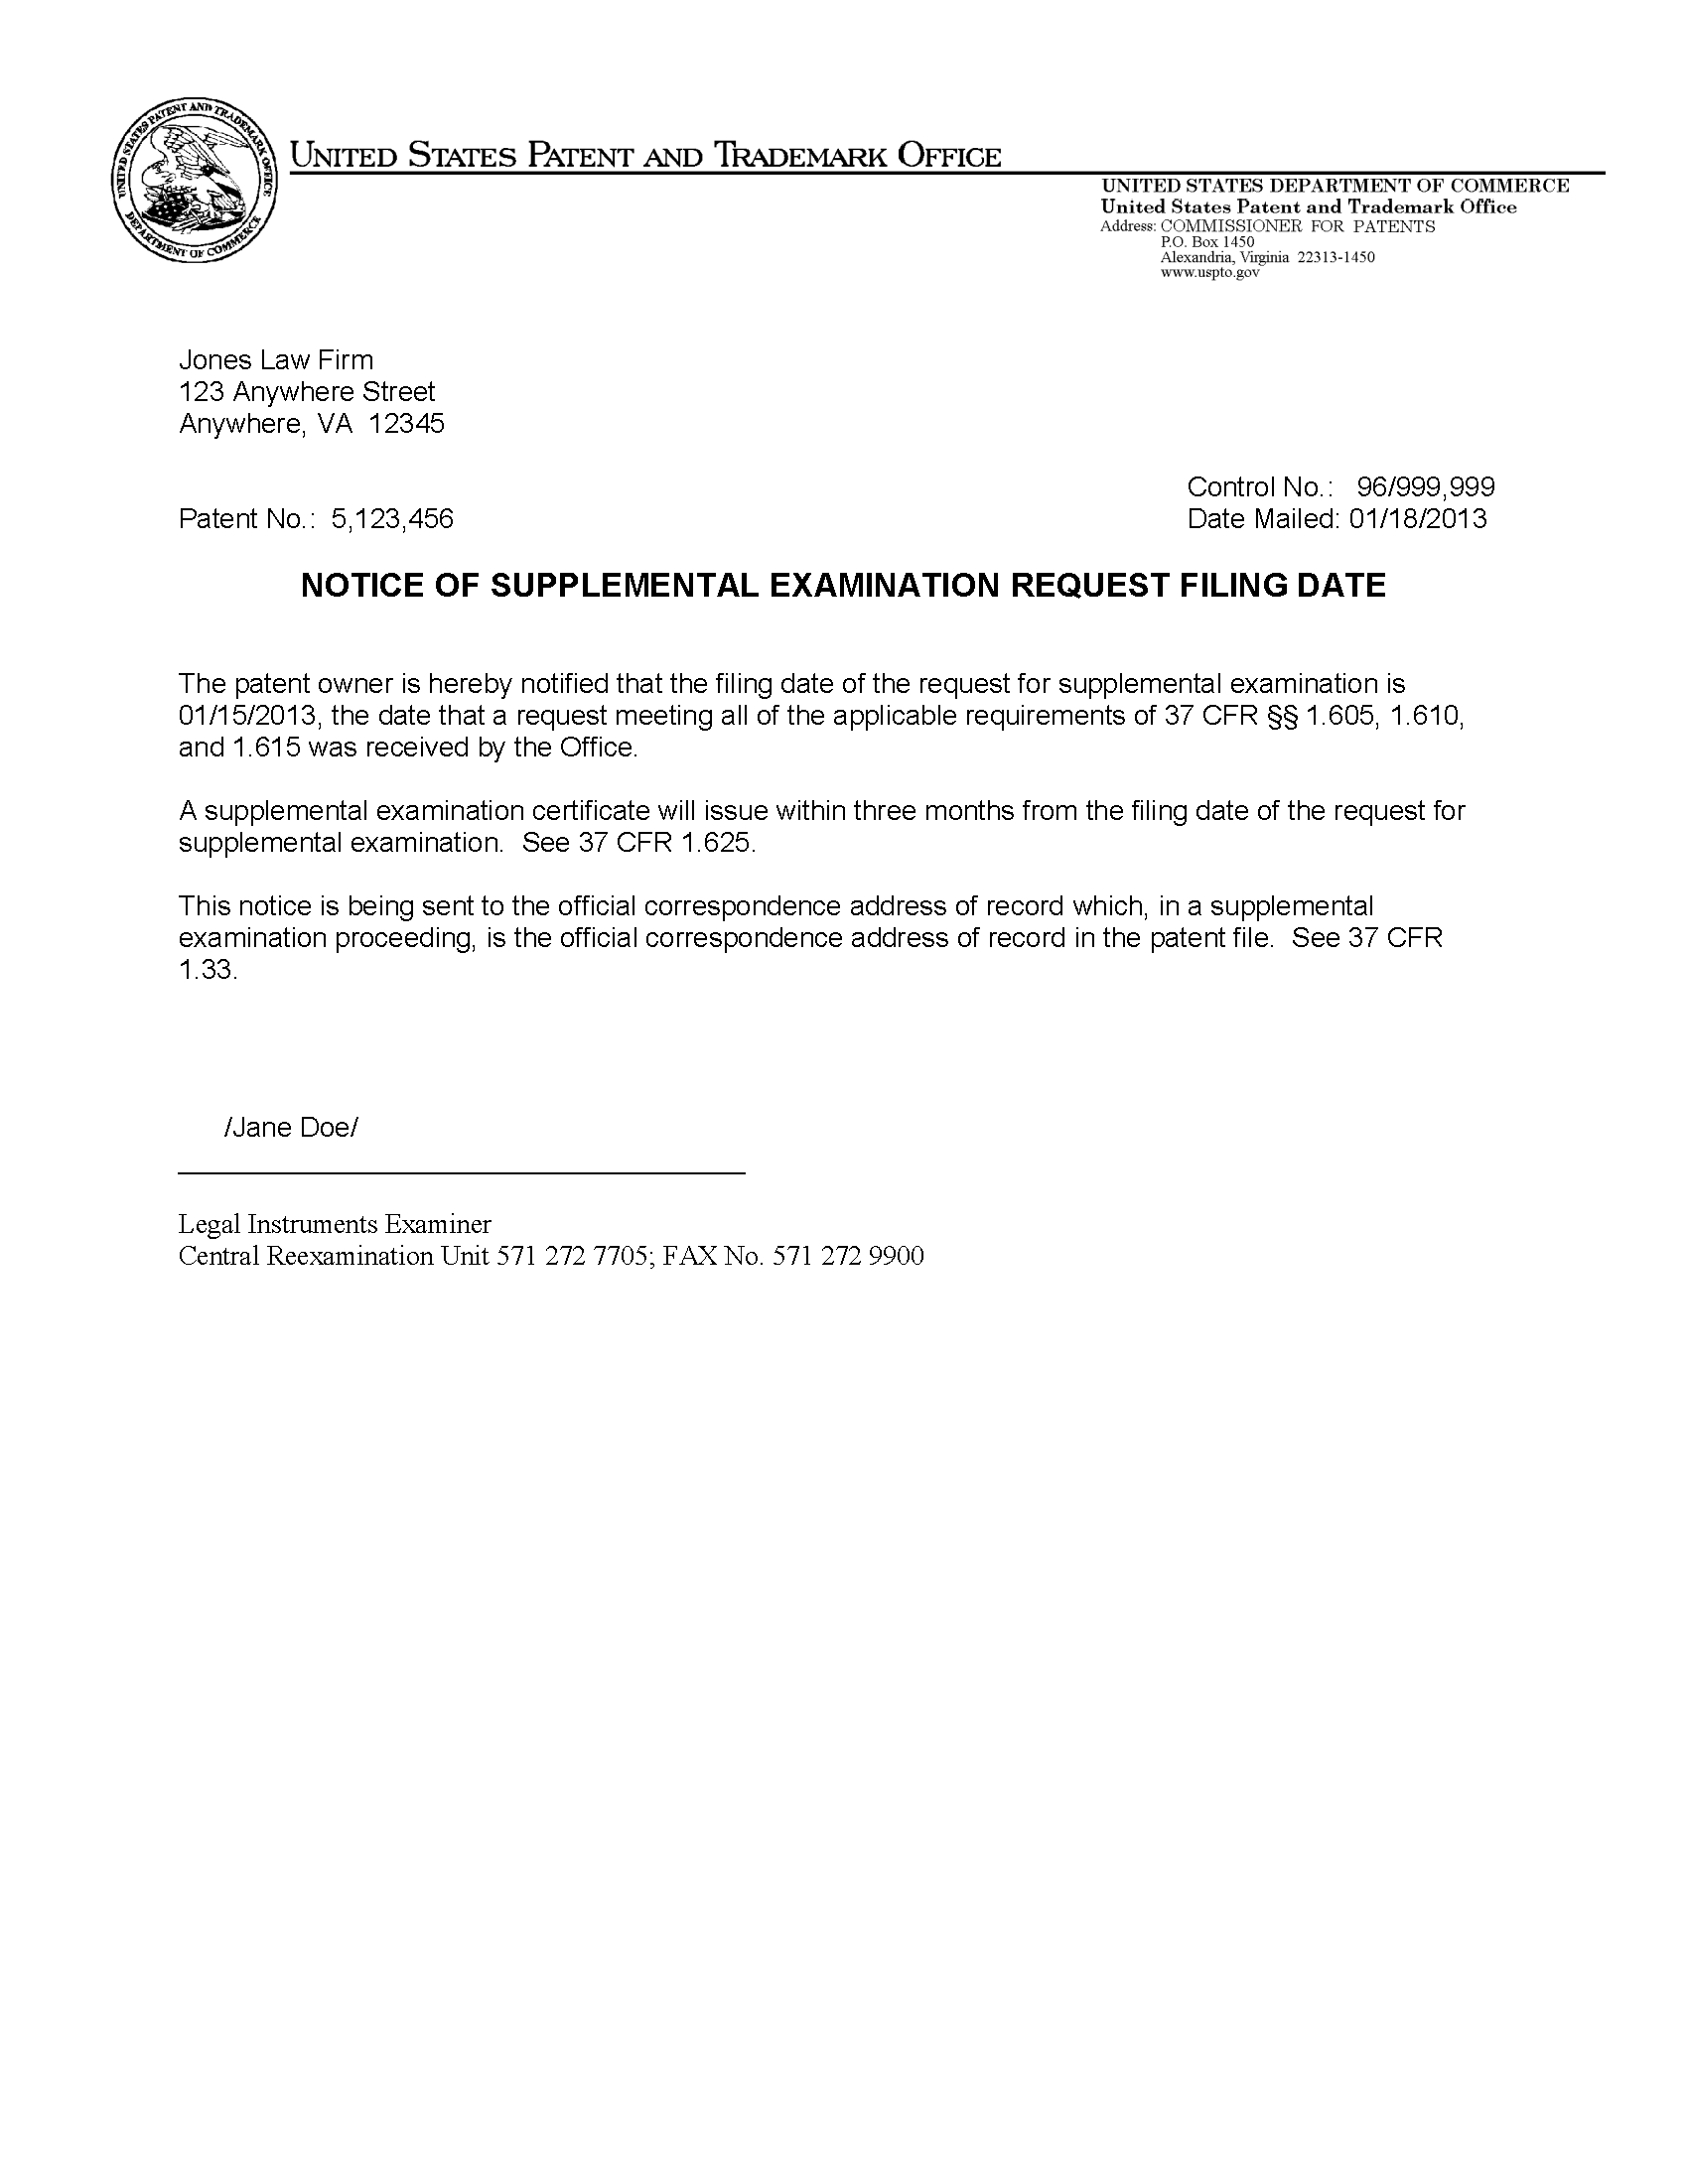 Notice of Supplemental Examination Request Filing Date